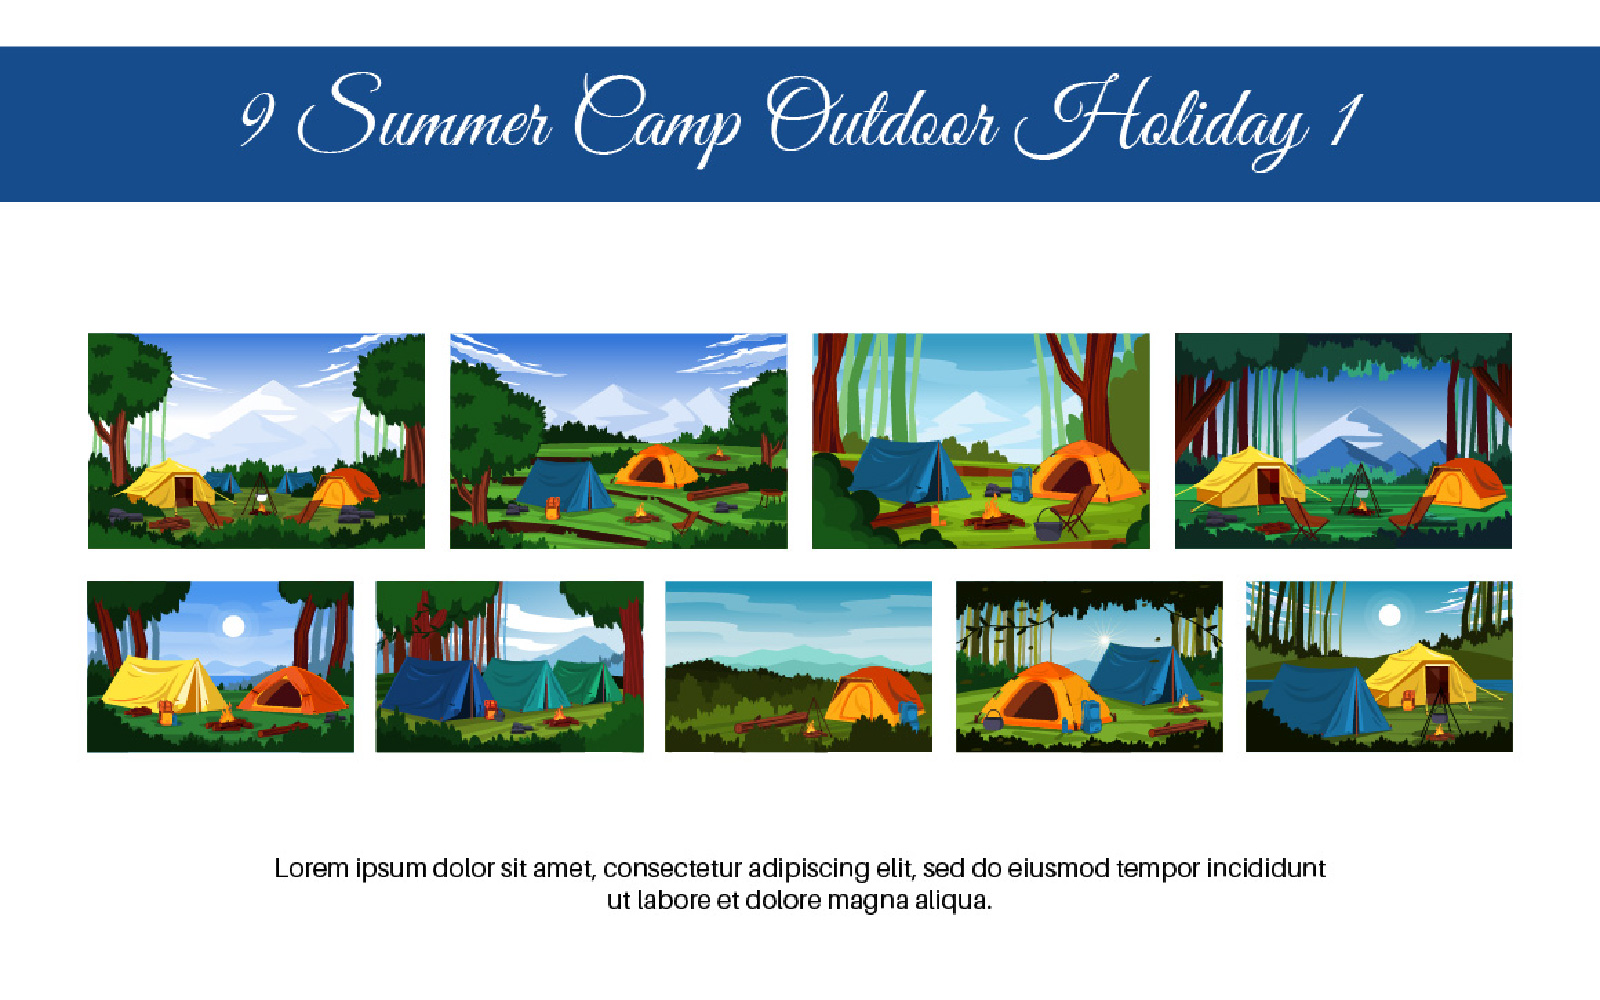 9 Summer Camp Outdoor Holiday 1